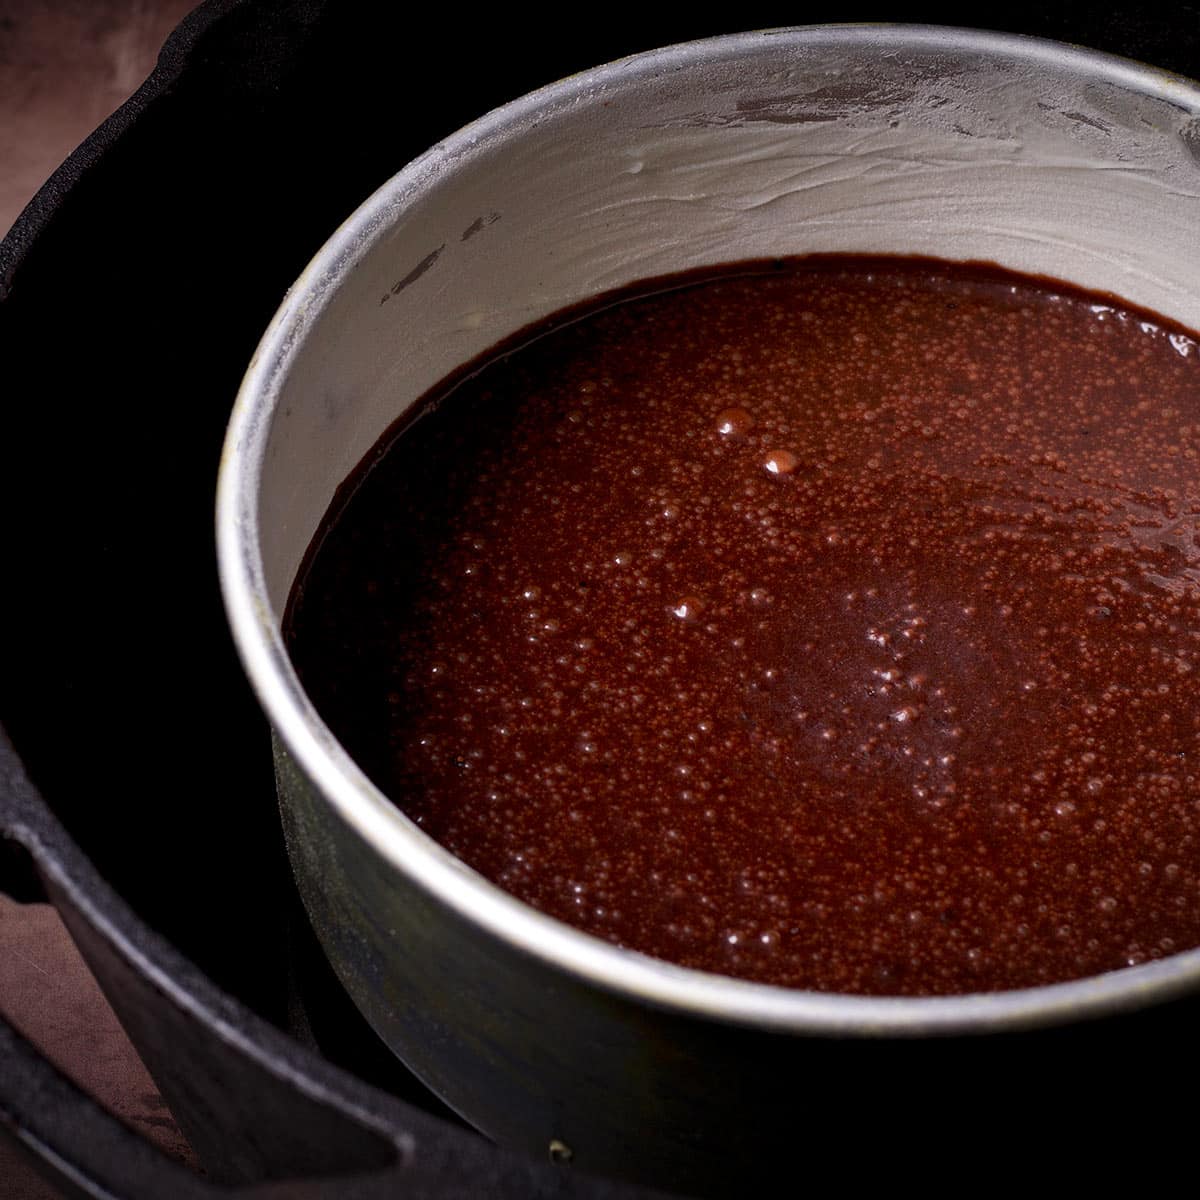 A pan of chocolate cake batter in the center of a Dutch oven.